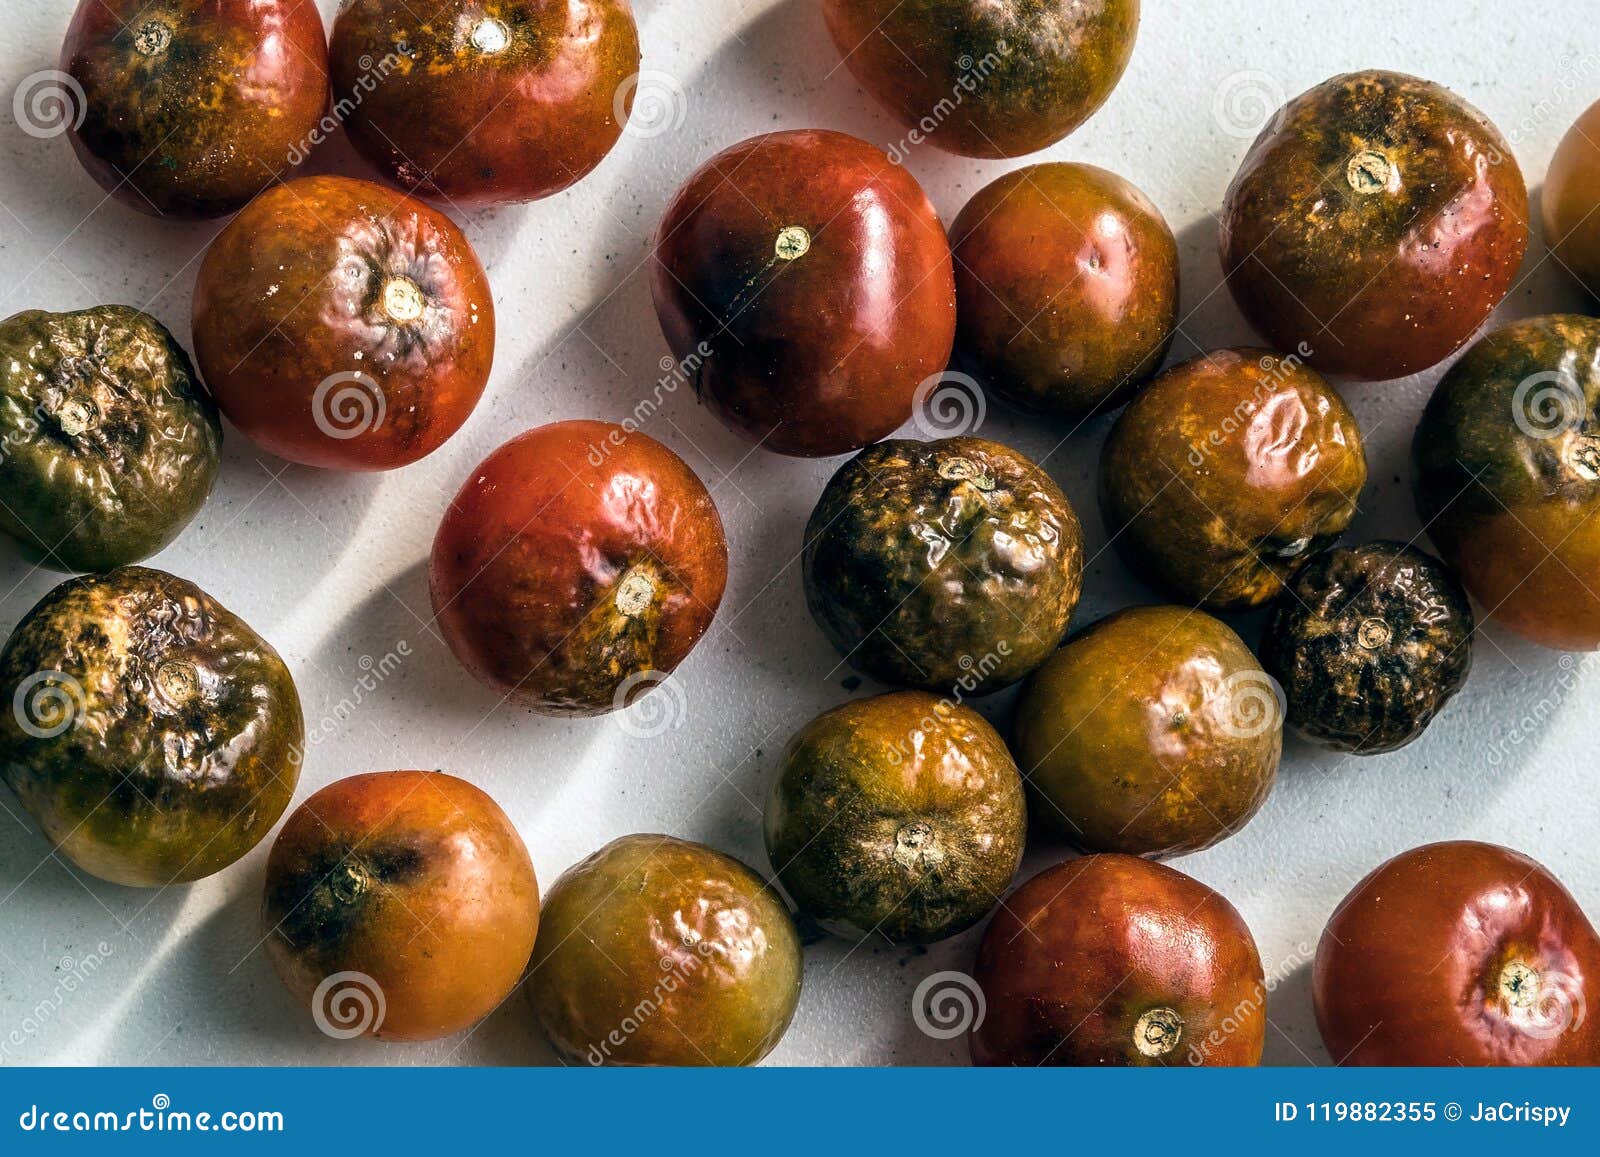 Old Rotten Cherry Tomatoes on White Background from Above Stock Image ...